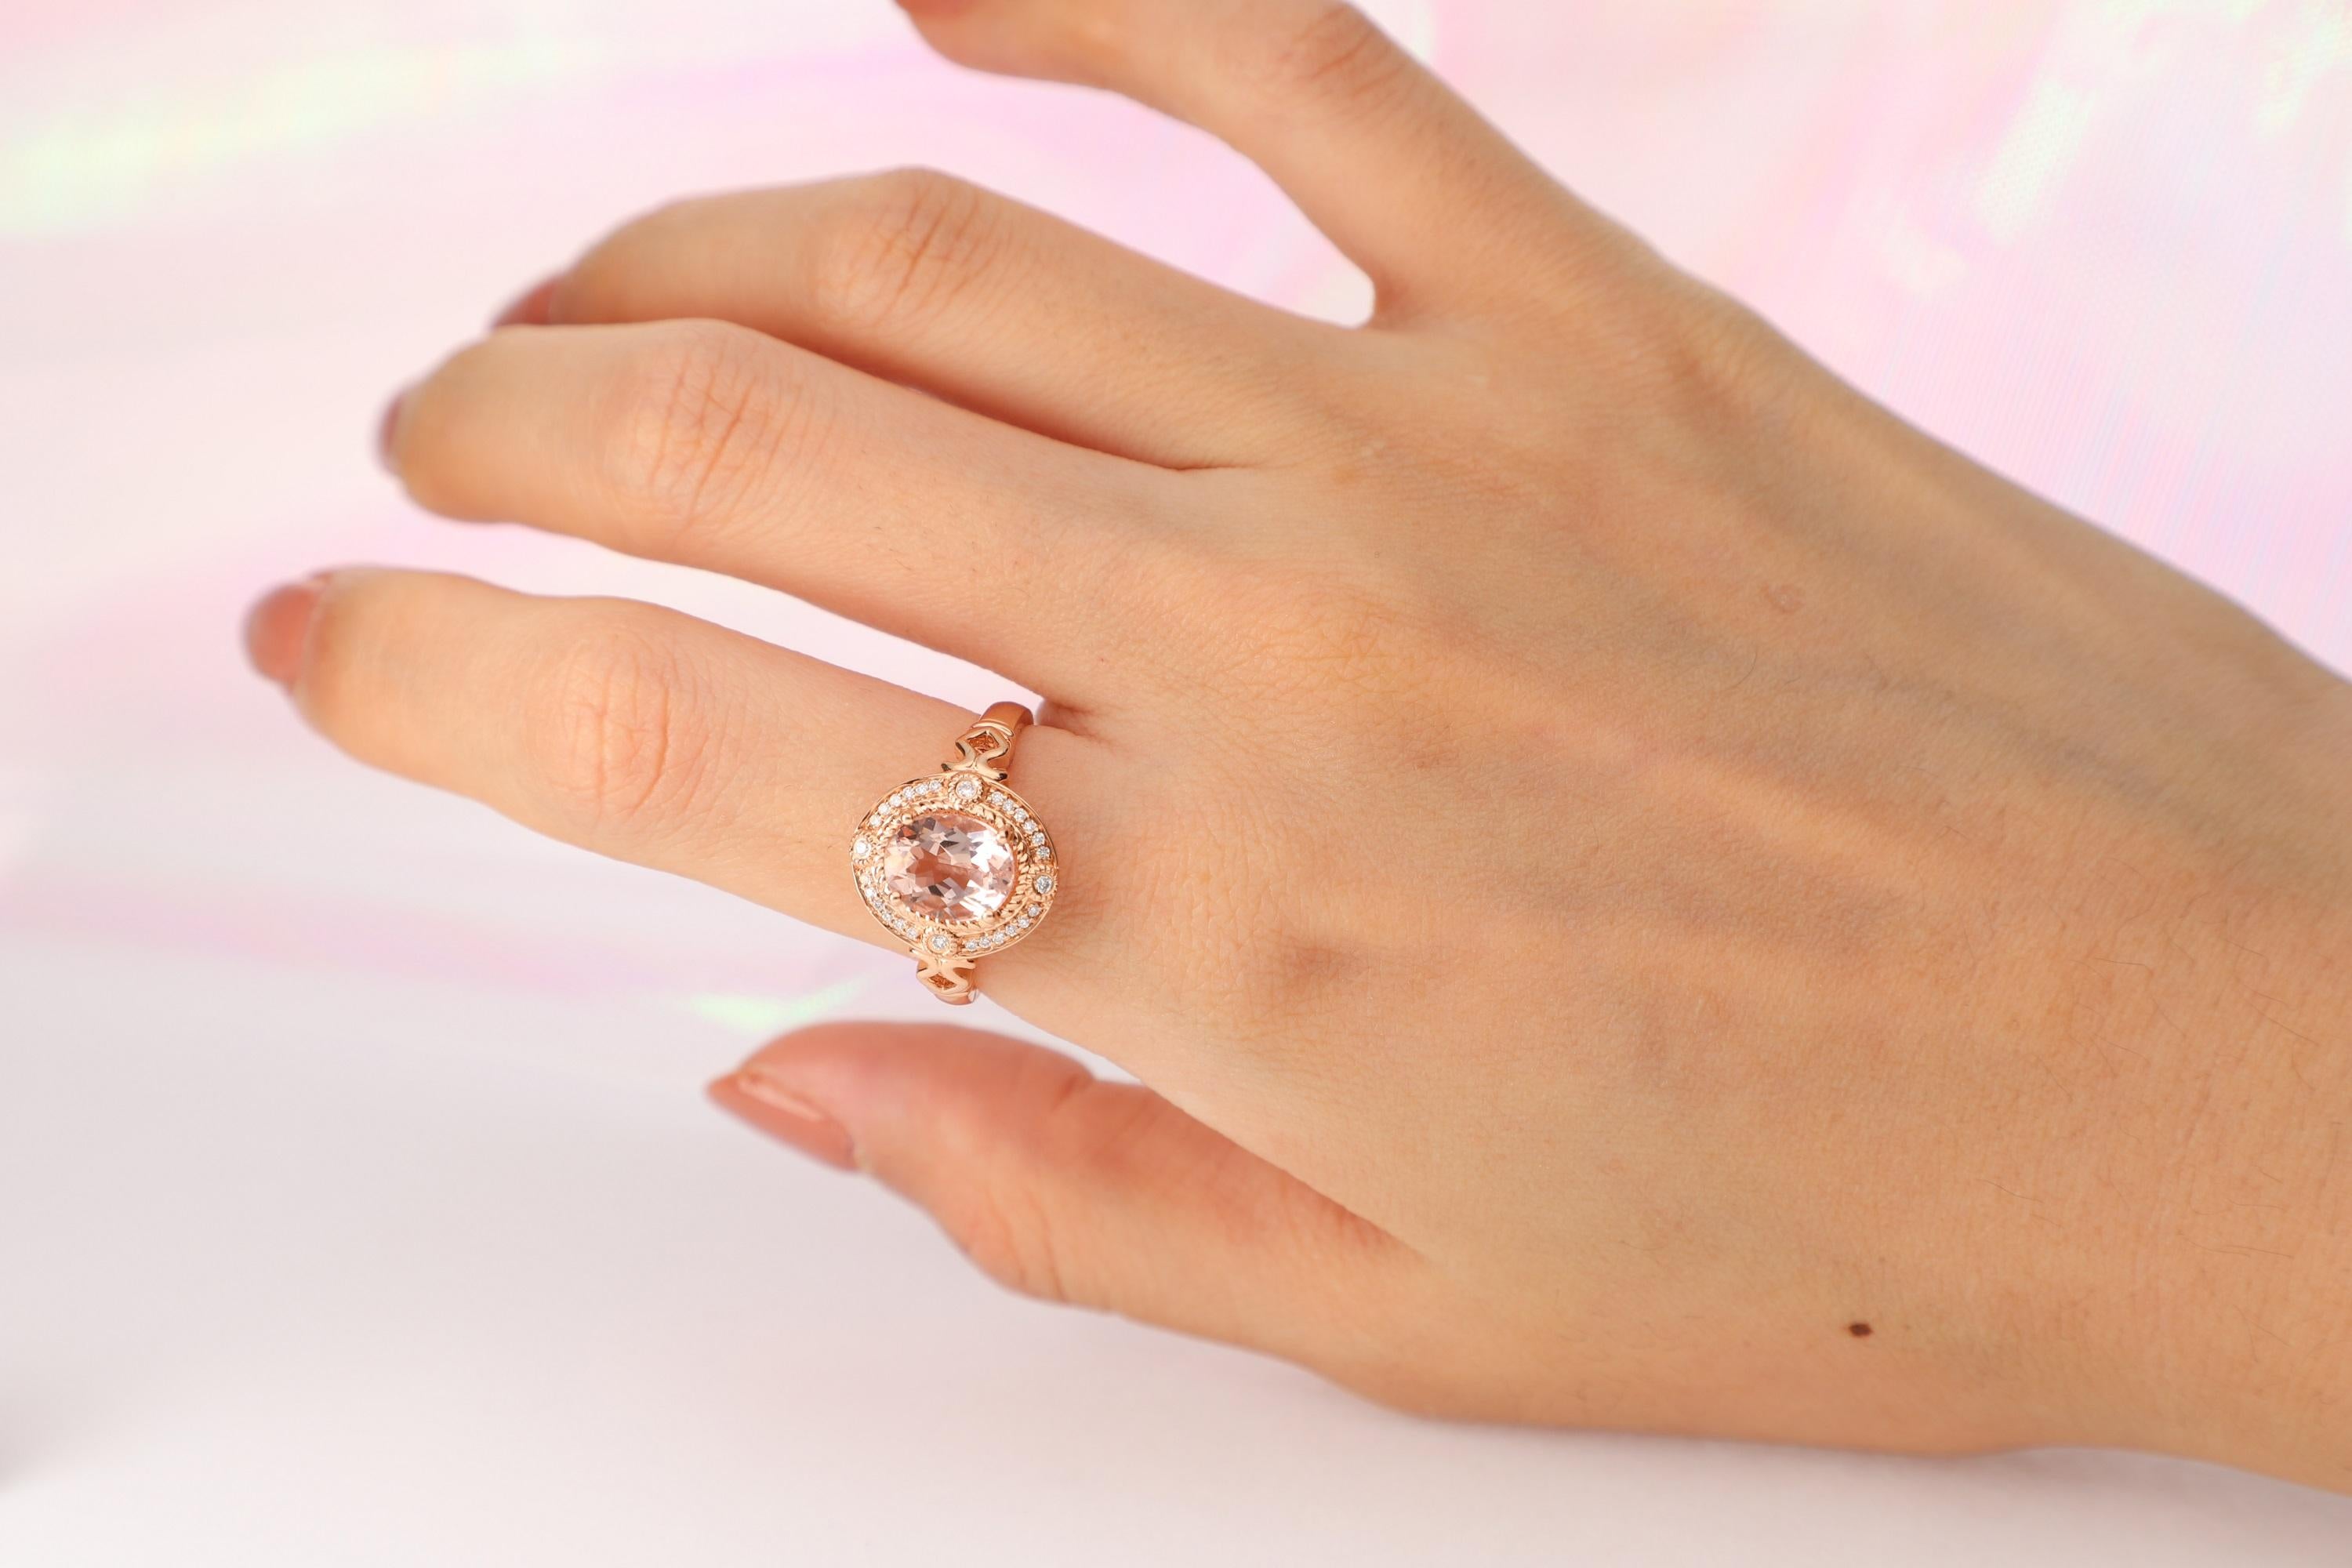 Stunning, timeless and classy eternity Unique Ring. Decorate yourself in luxury with this Gin & Grace Ring. The 14K Rose Gold jewelry boasts with Oval-cut 1 pcs 1.75 carat Morganite and Natural Round-cut white Diamond (28 Pcs) 0.11 Carat accent